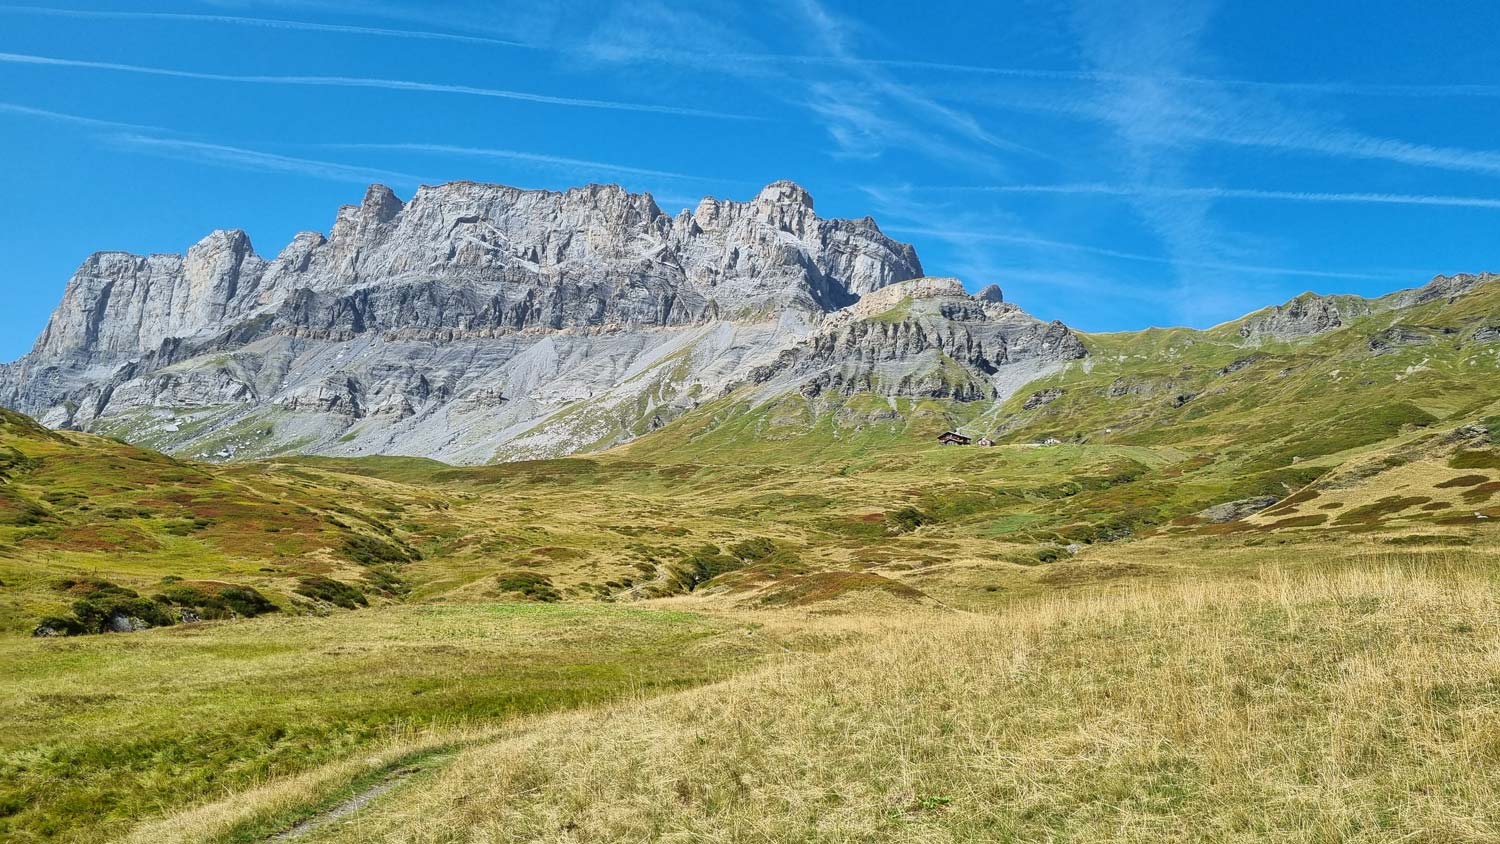 View of the Anterne Mountain from the Passy Valley